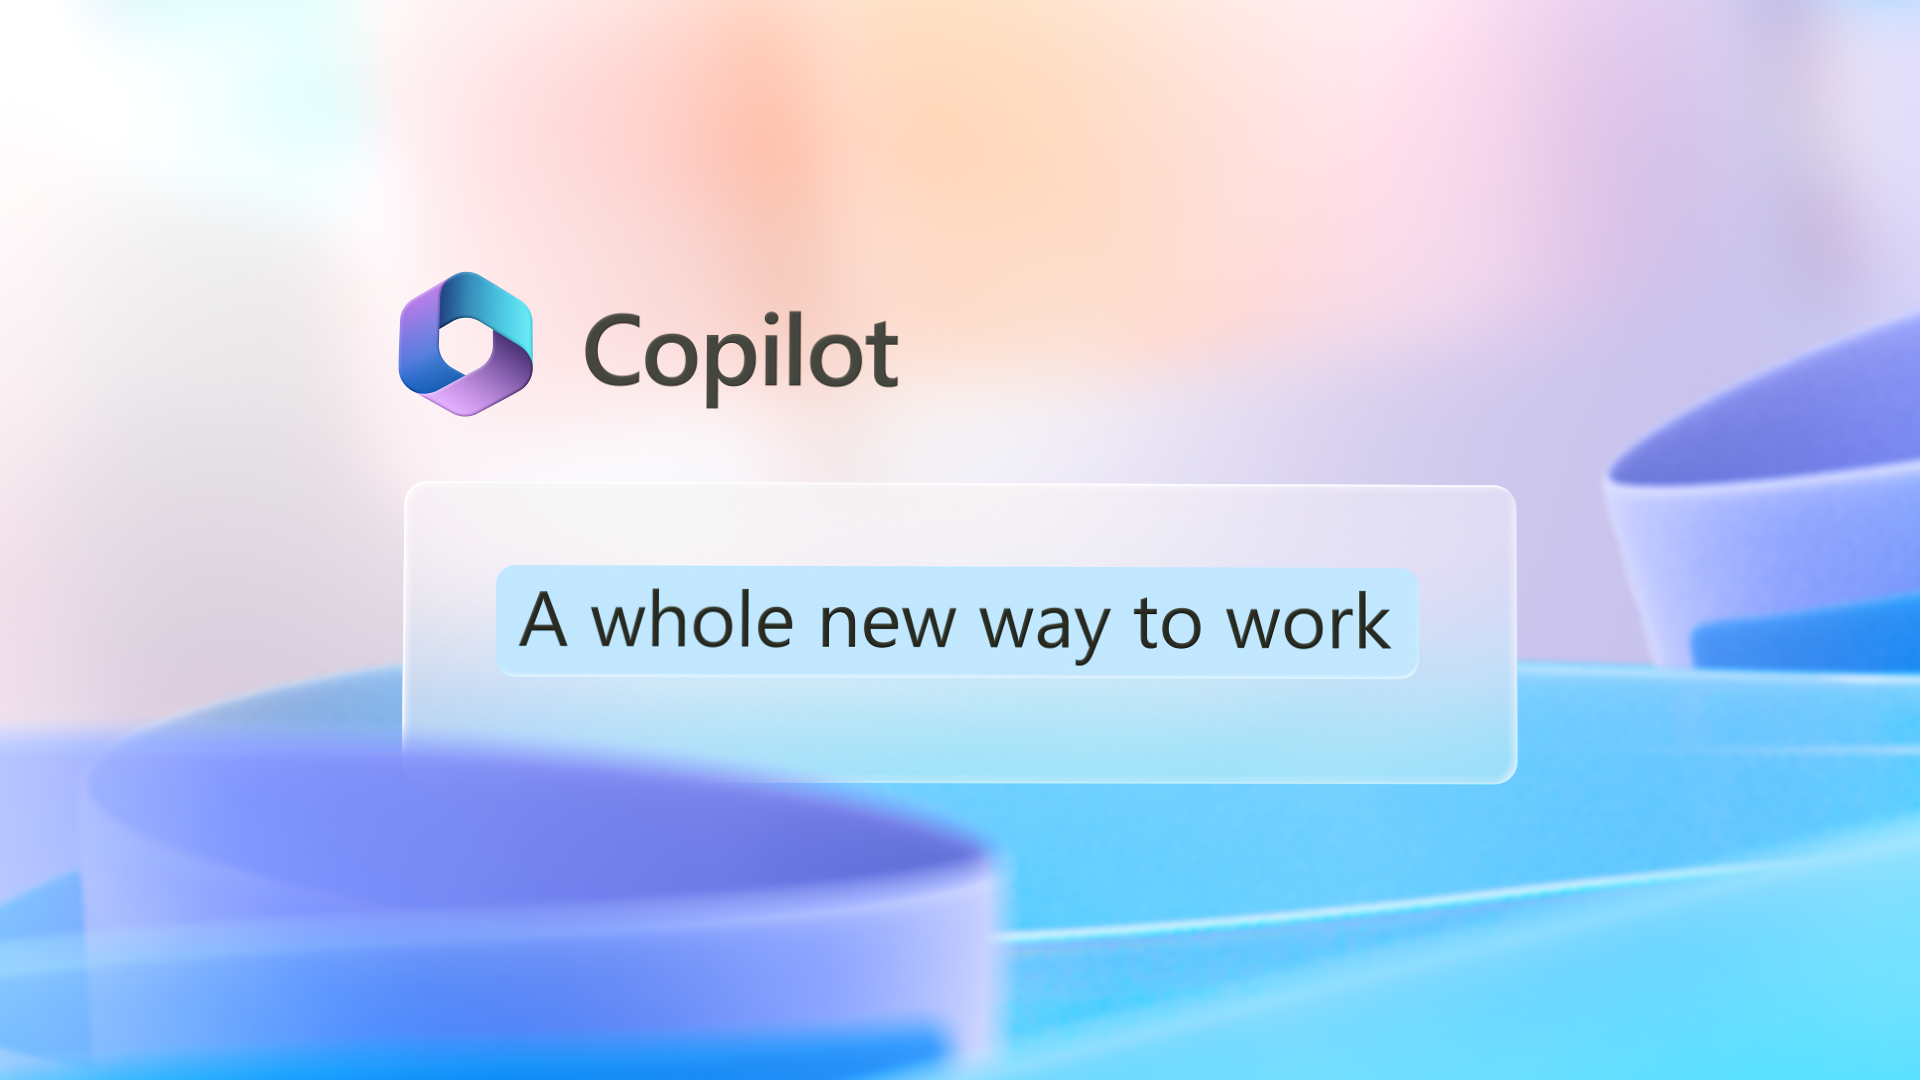 Graphic image has Copilot logo with the words A whole new way to work.